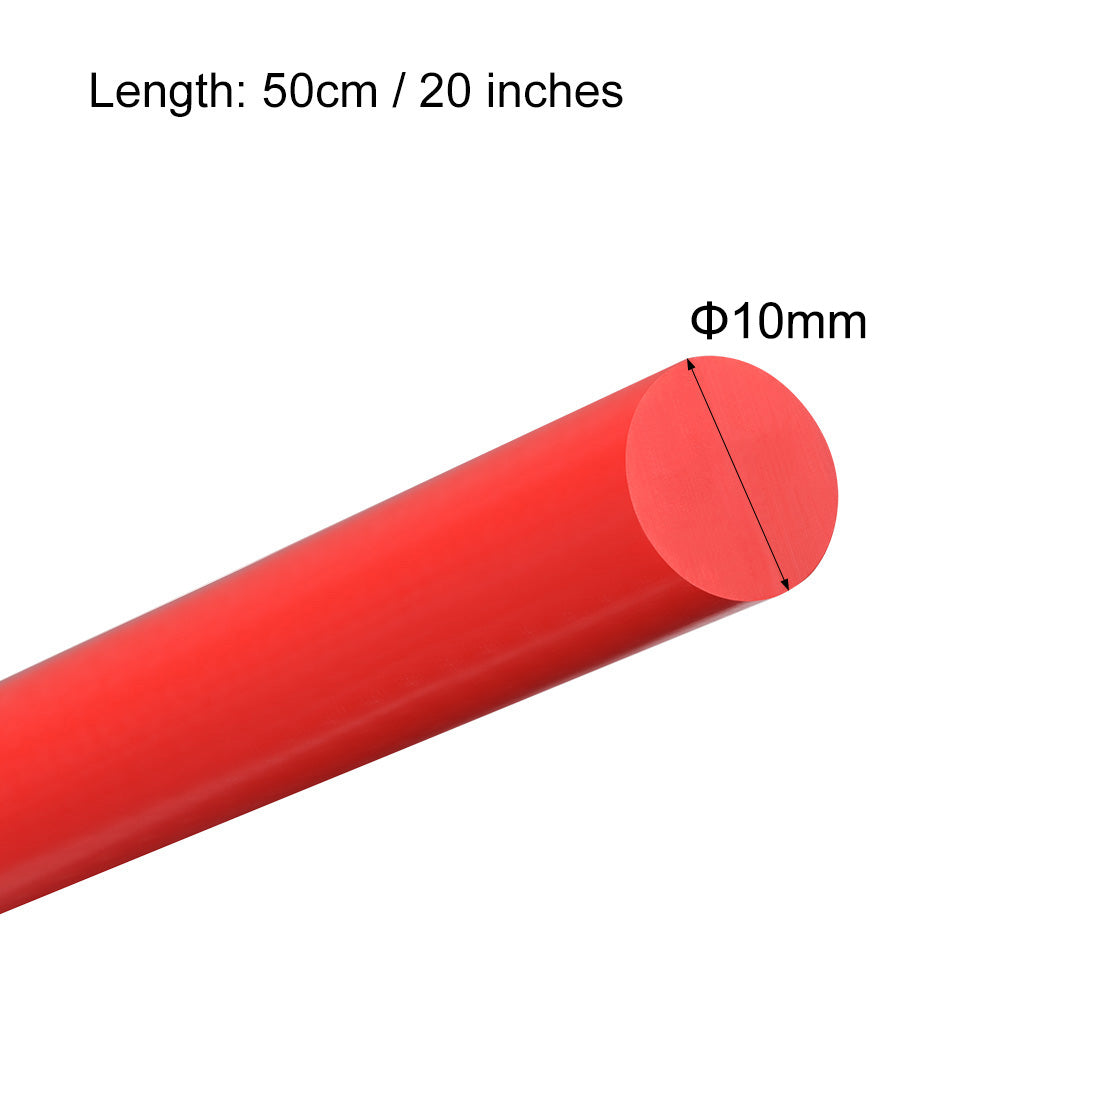 uxcell Uxcell Plastic Round Rod,10mm Dia 50cm Red Engineering Plastic Round Bar 3pcs